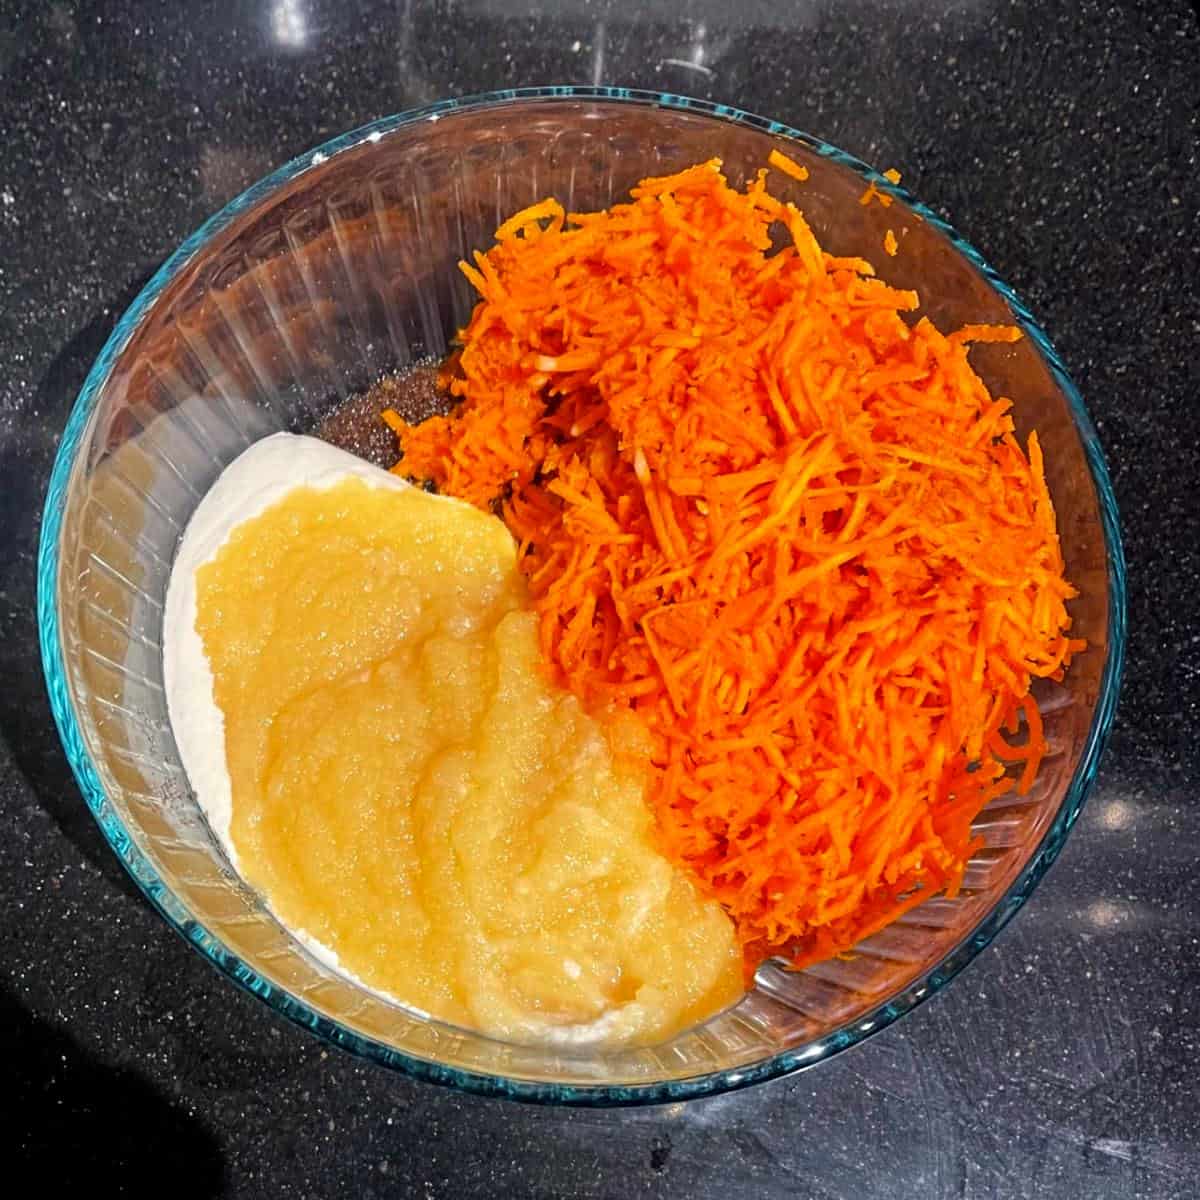 Wet ingredients for vegan carrot cake in small glass bowl.